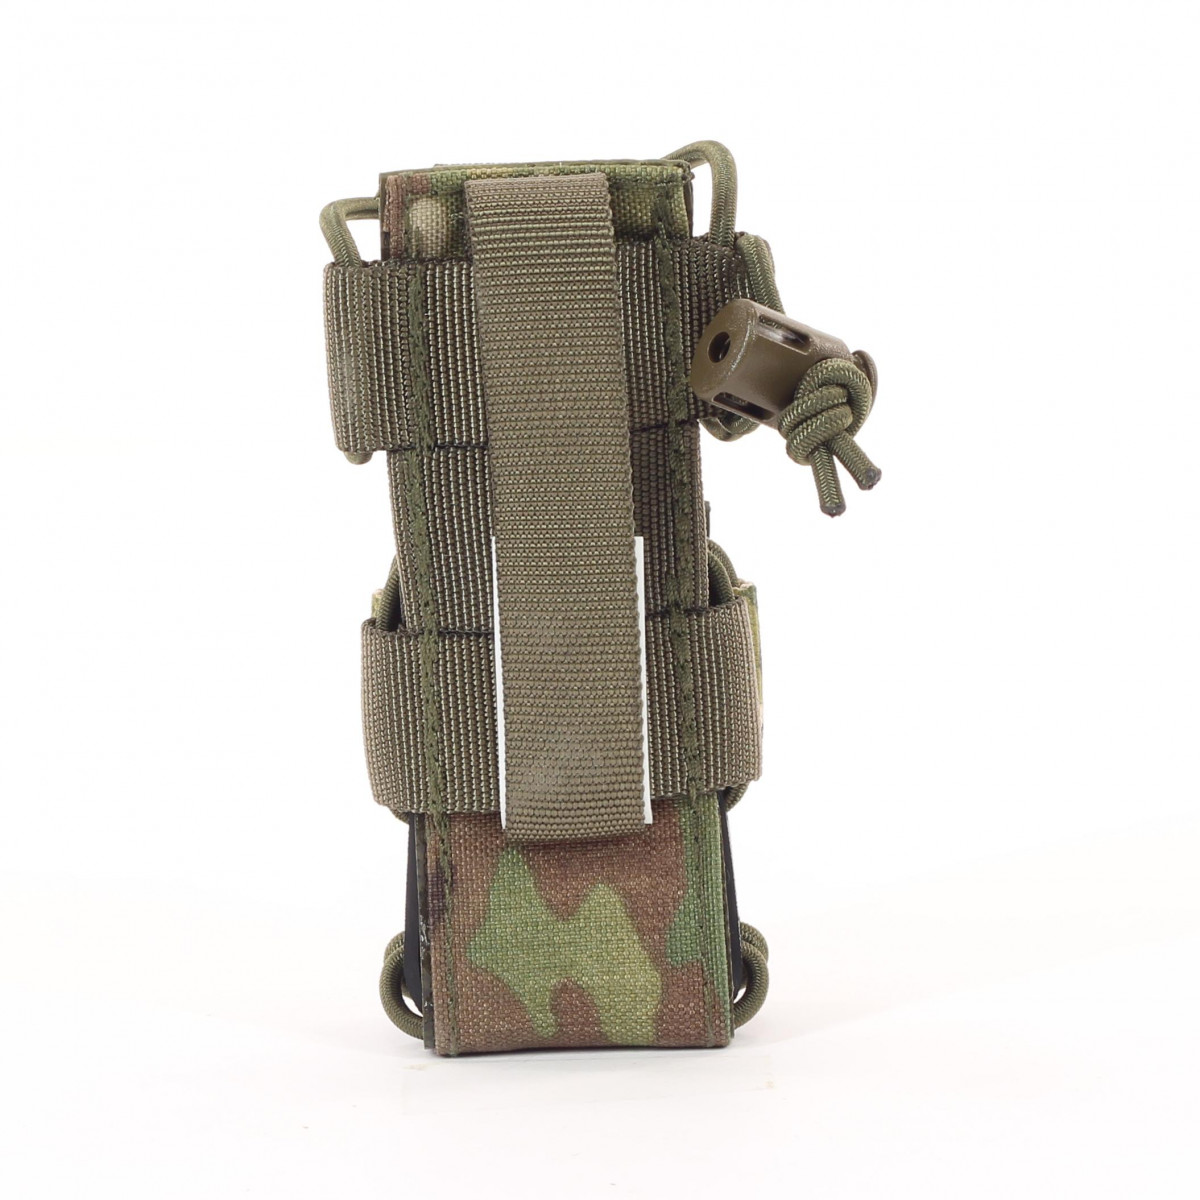 Universal lamp holster and magazine pouch MOLLE system in Multicam